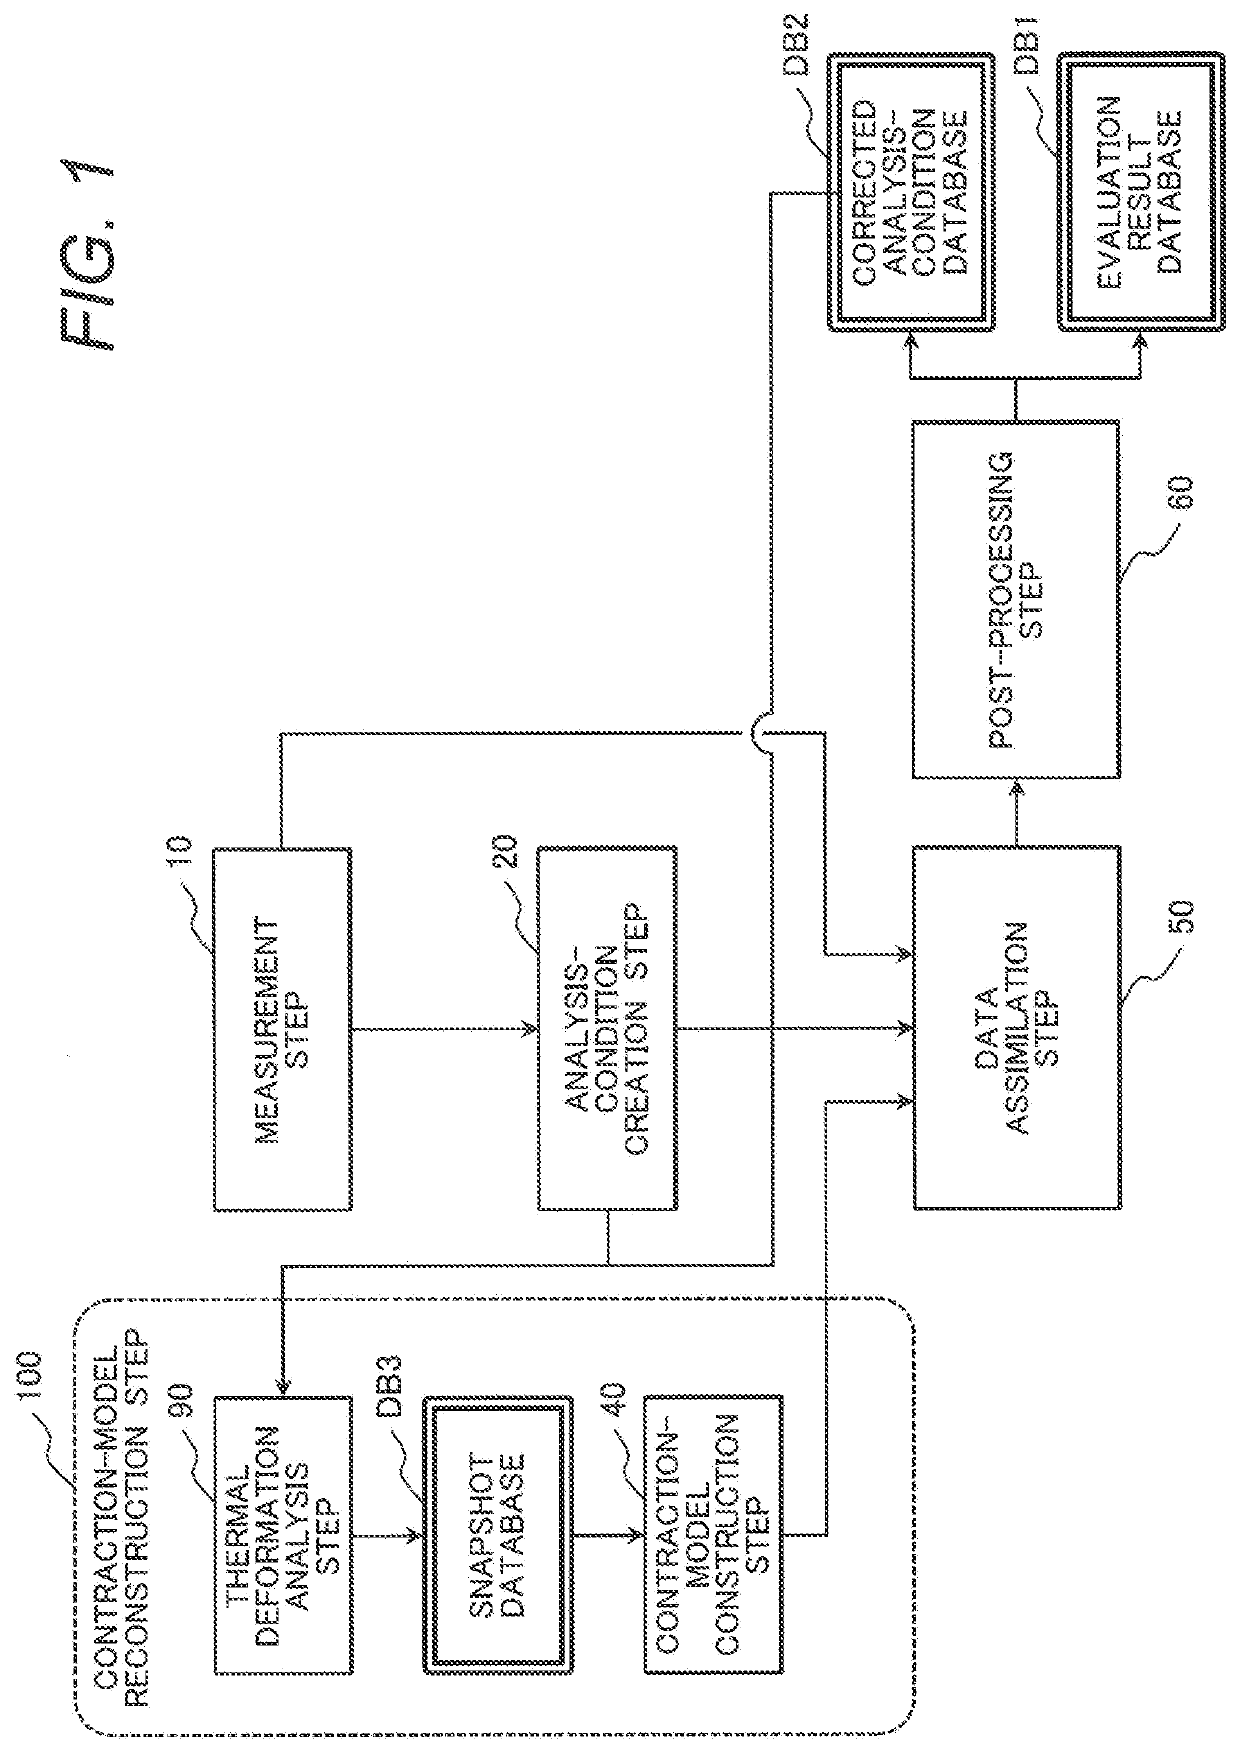 Method and apparatus for estimating internal state of thermal component